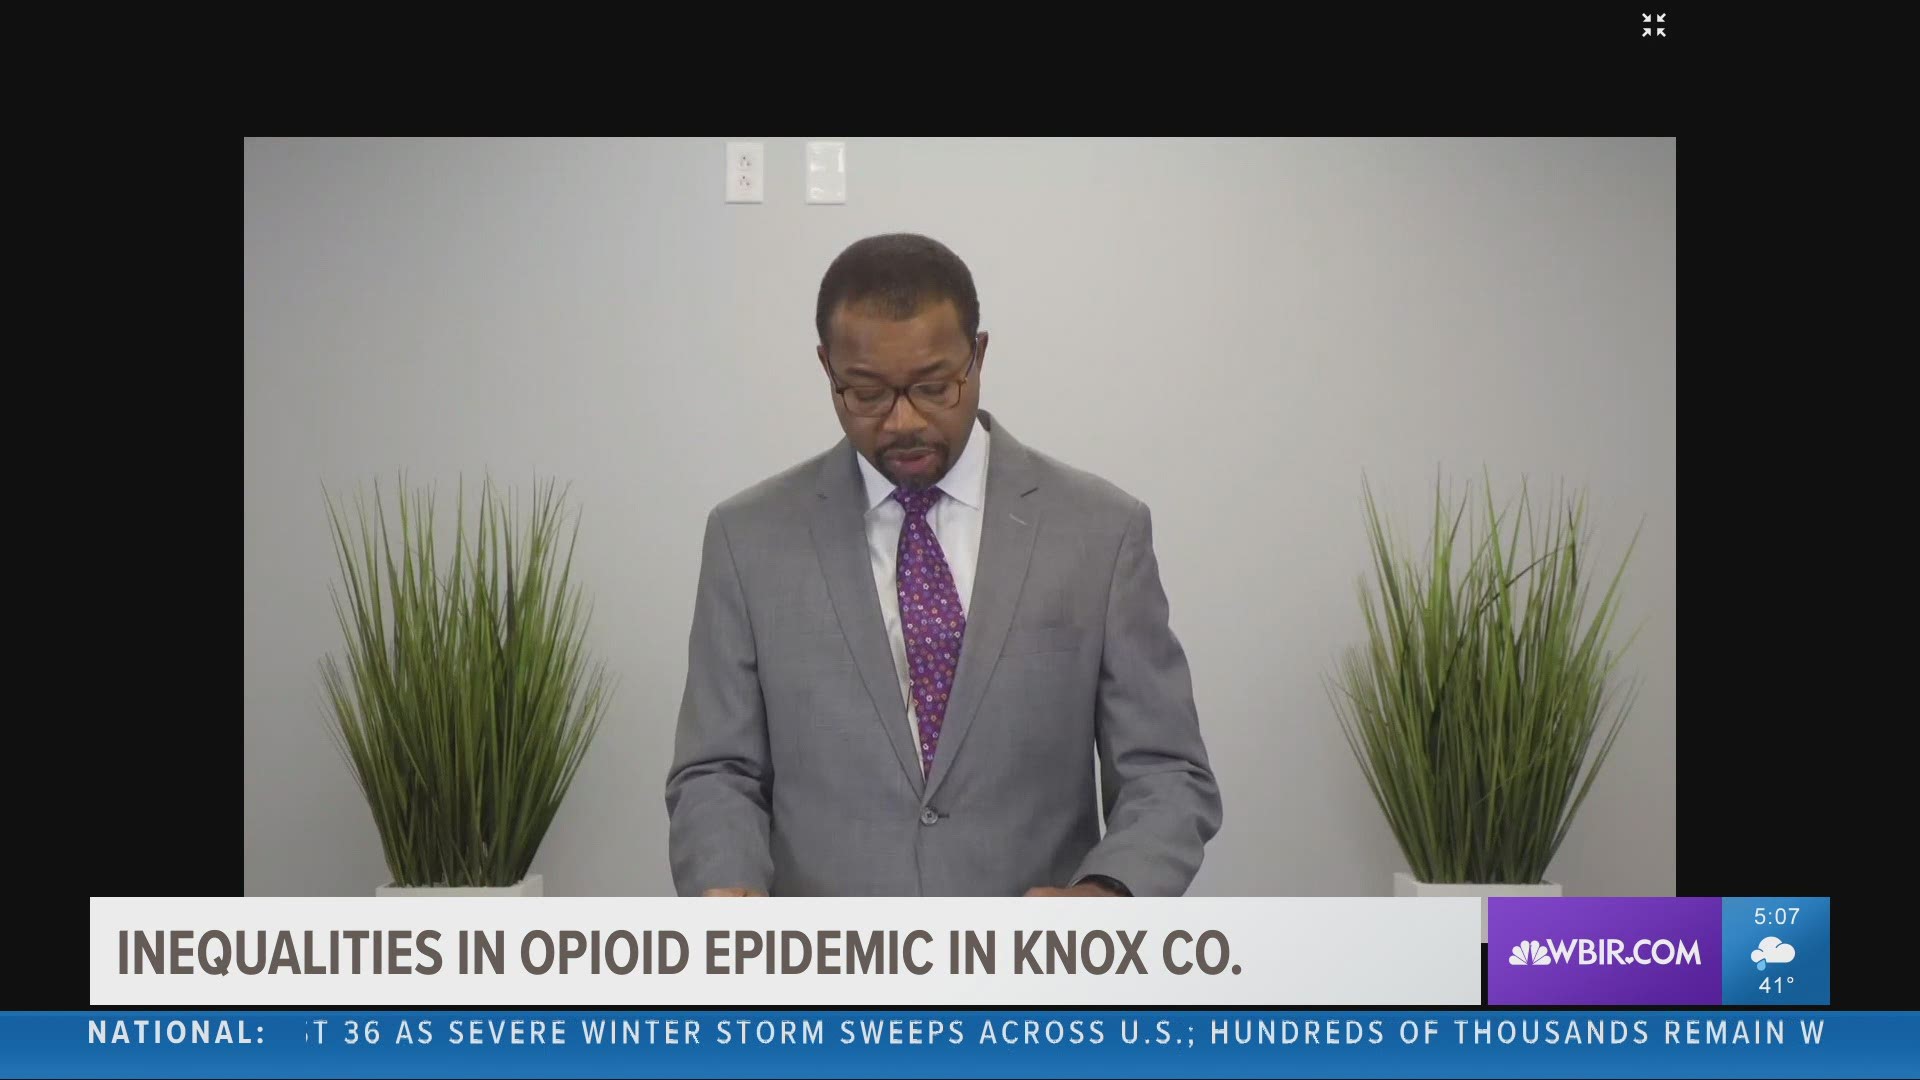 Black people are seeing an increased rate of overdose deaths in the Knoxville area. There are disparities in their treatment as well.